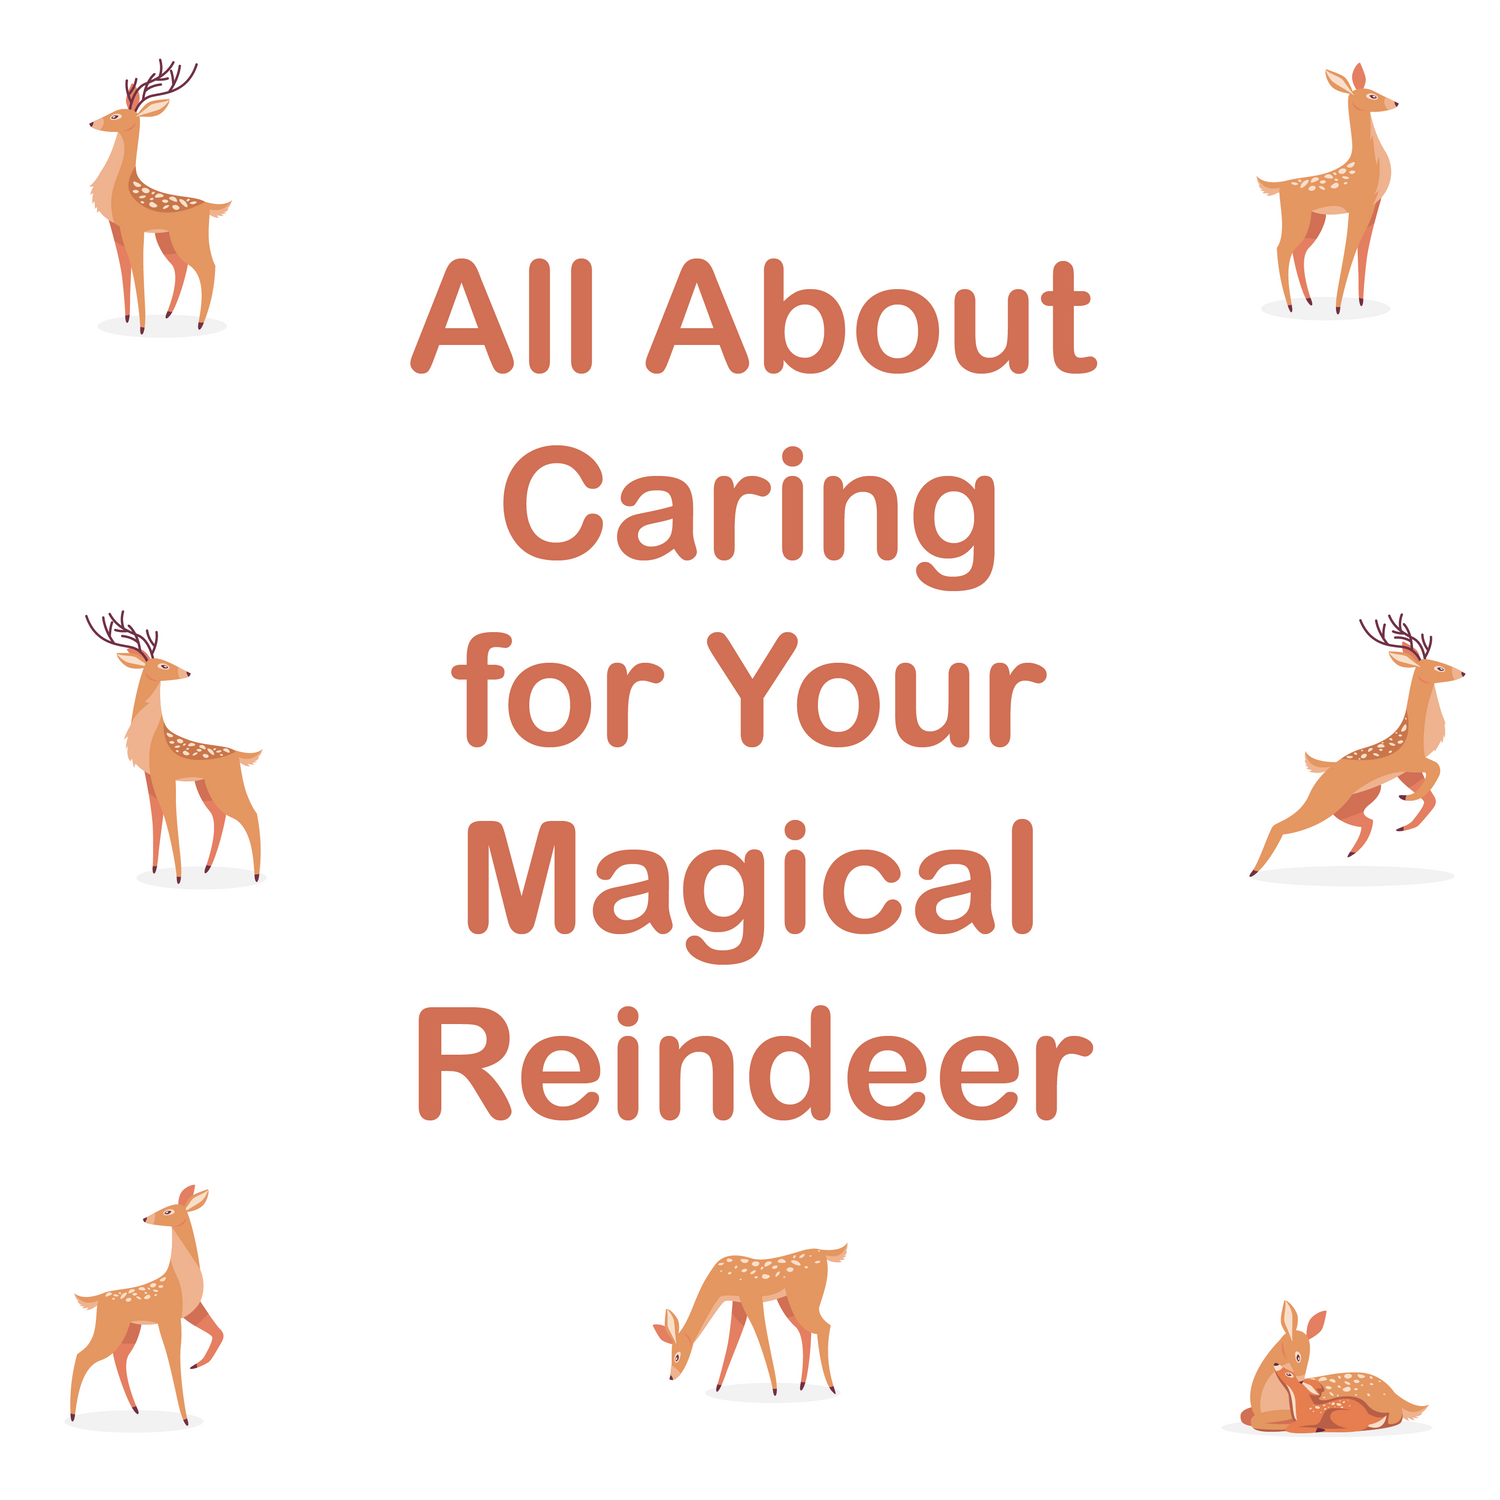 All About Caring for Your Magical Reindeer